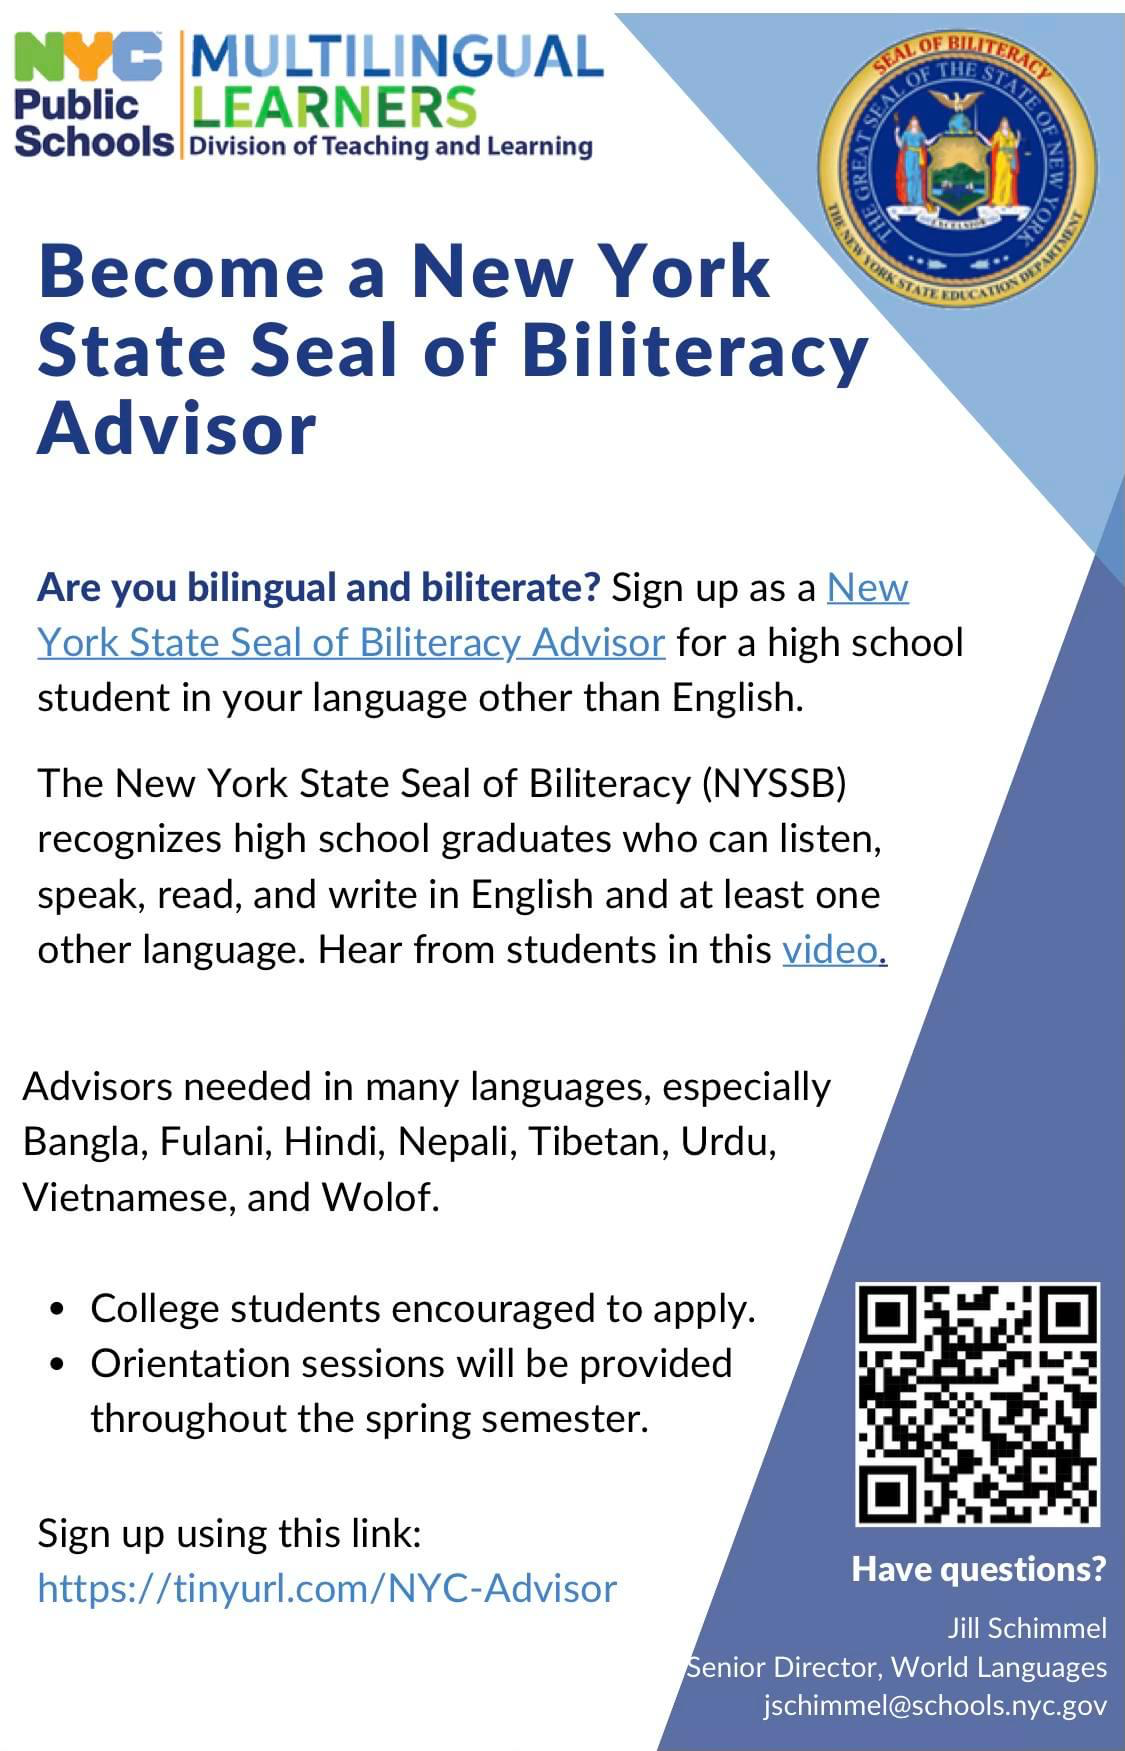 NYC DOE is looking for New York State Seal of Biliteracy (NYSSB